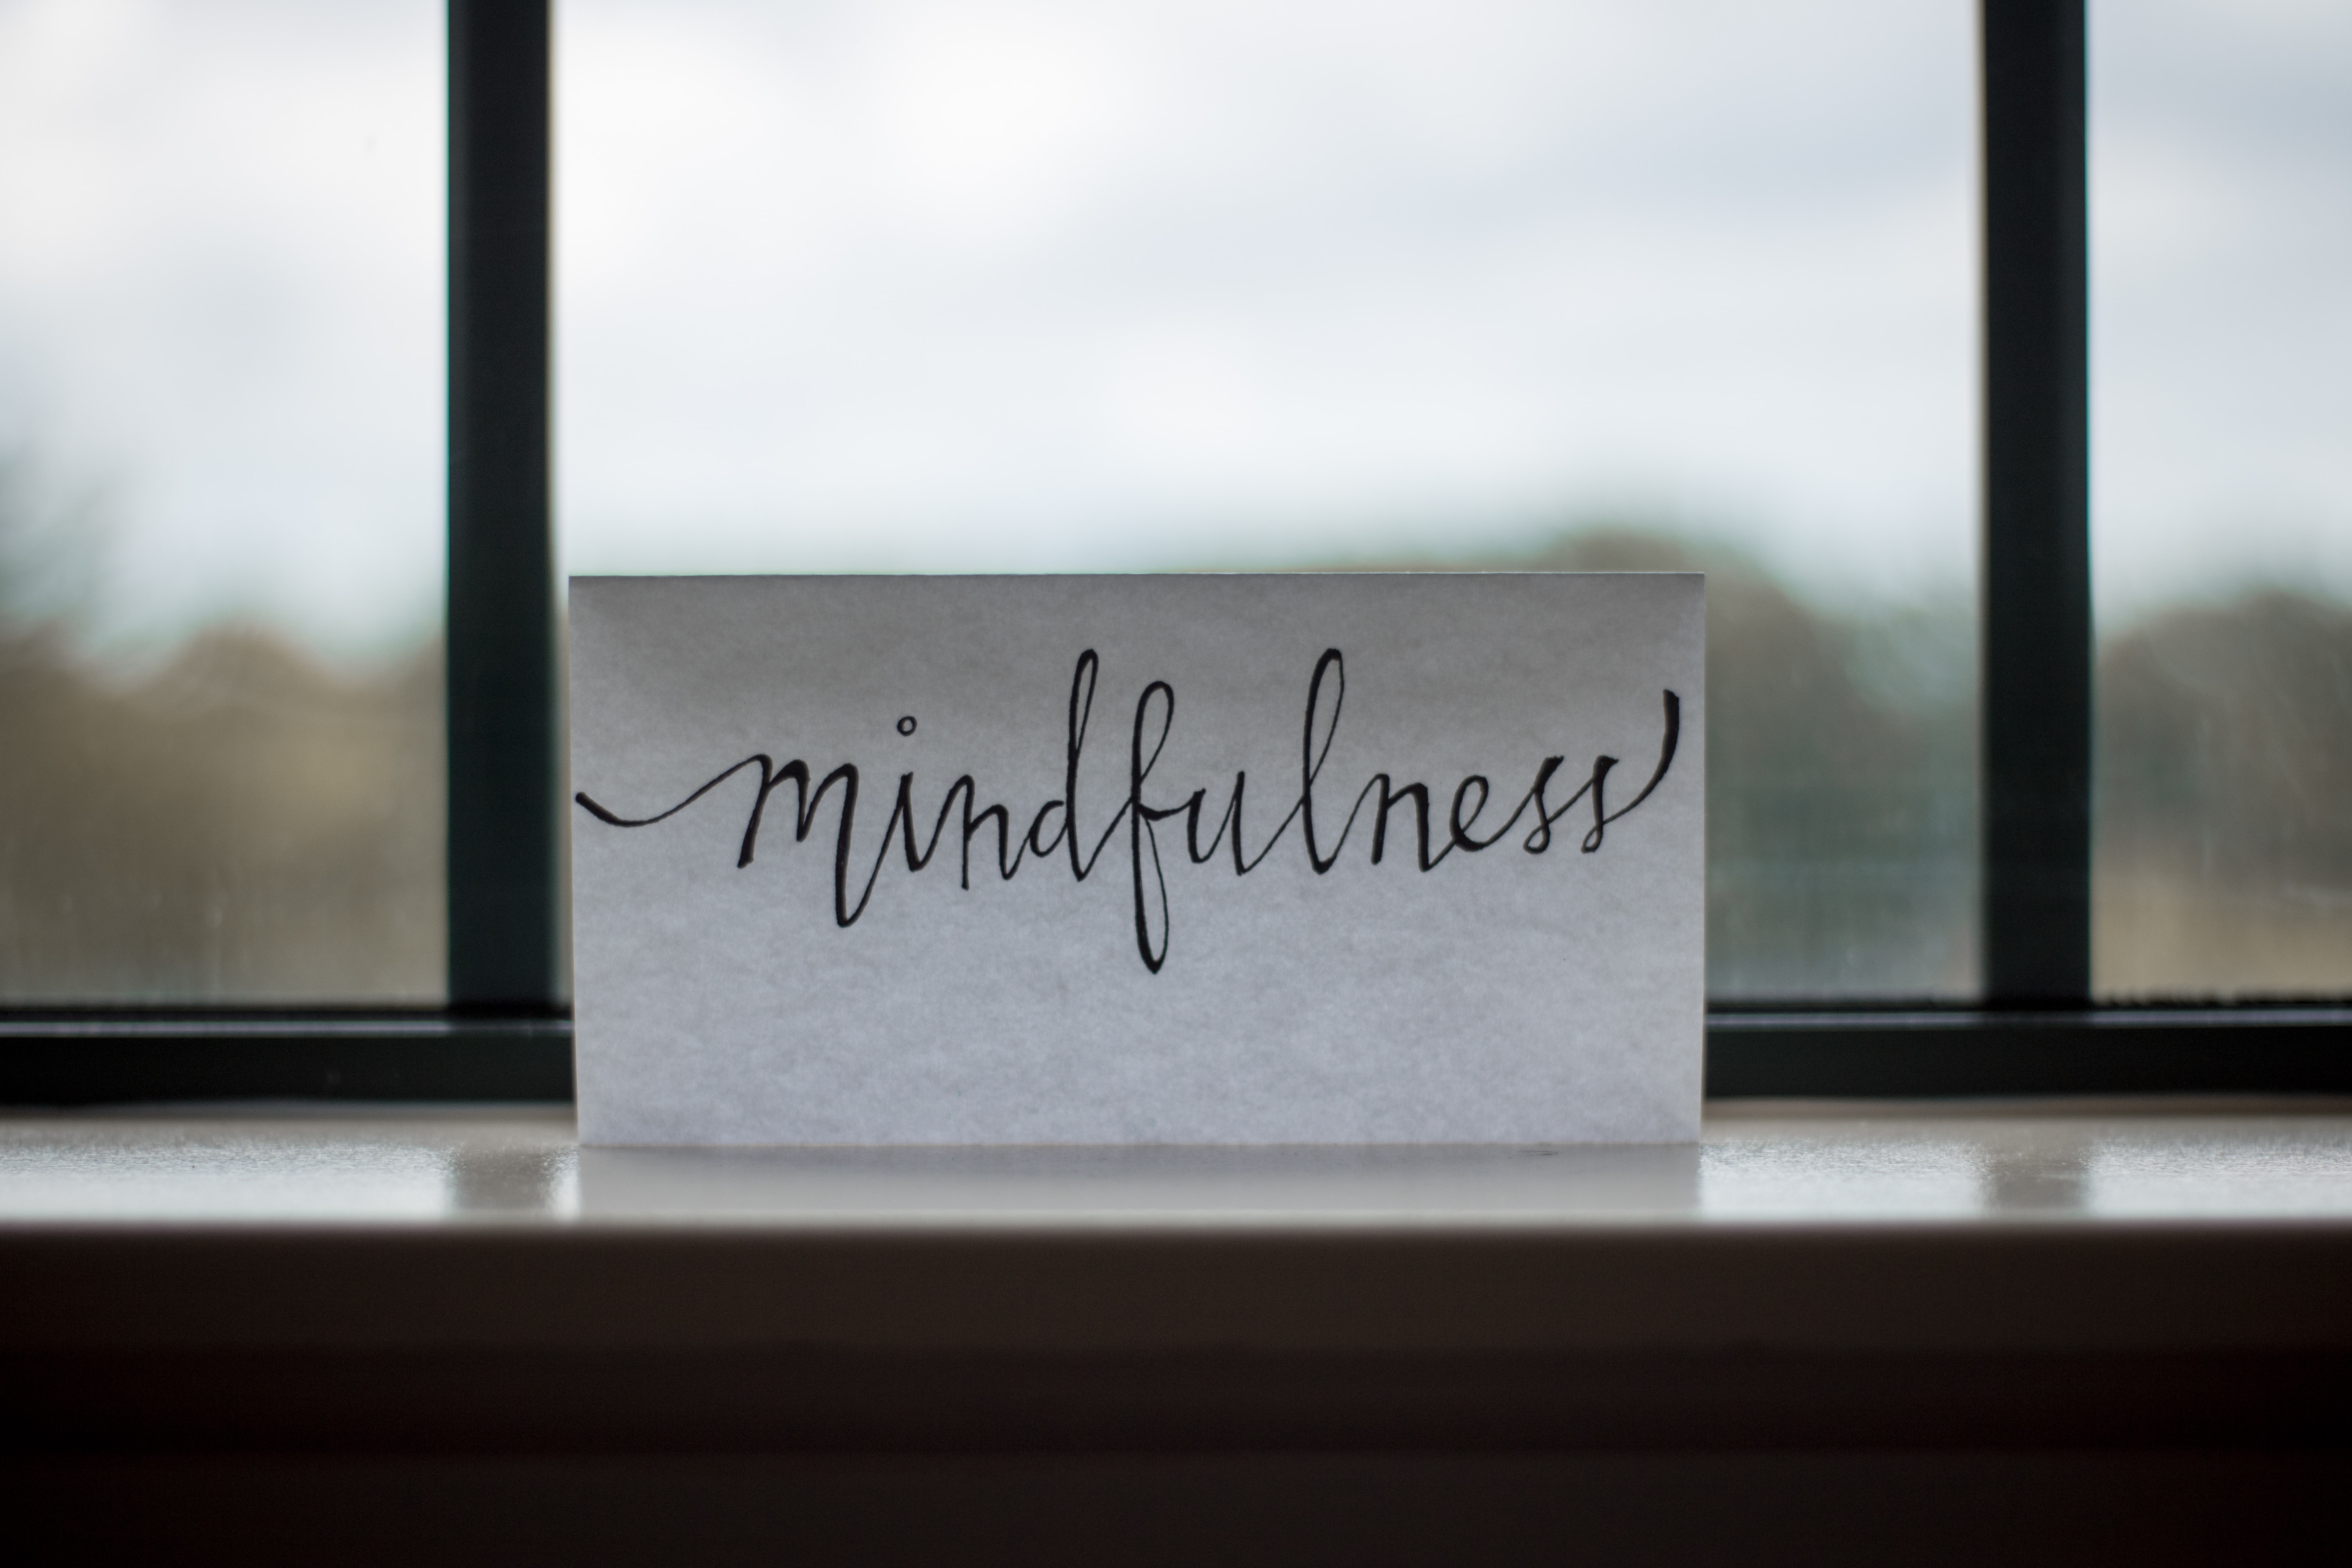 A sign with 'Mindfulness' handwritten on it in cursive script against a window